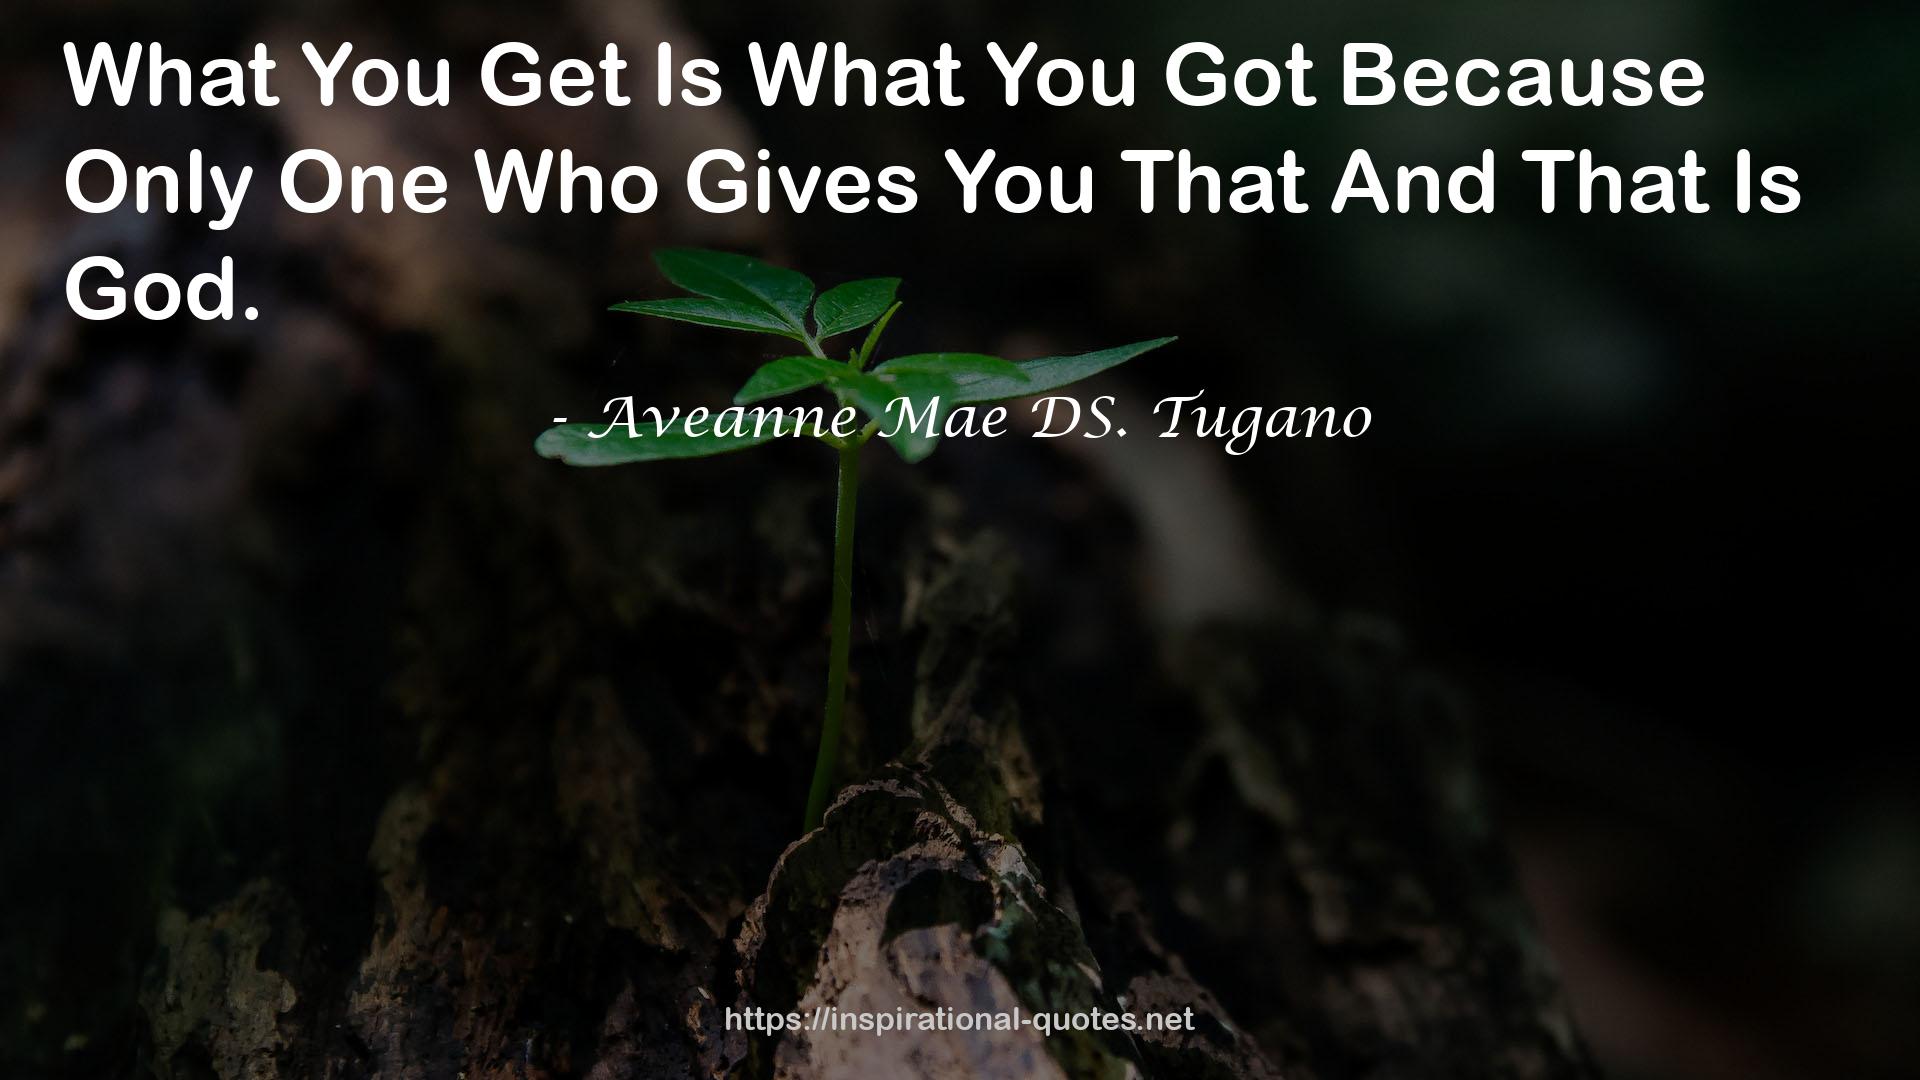 Aveanne Mae DS. Tugano QUOTES